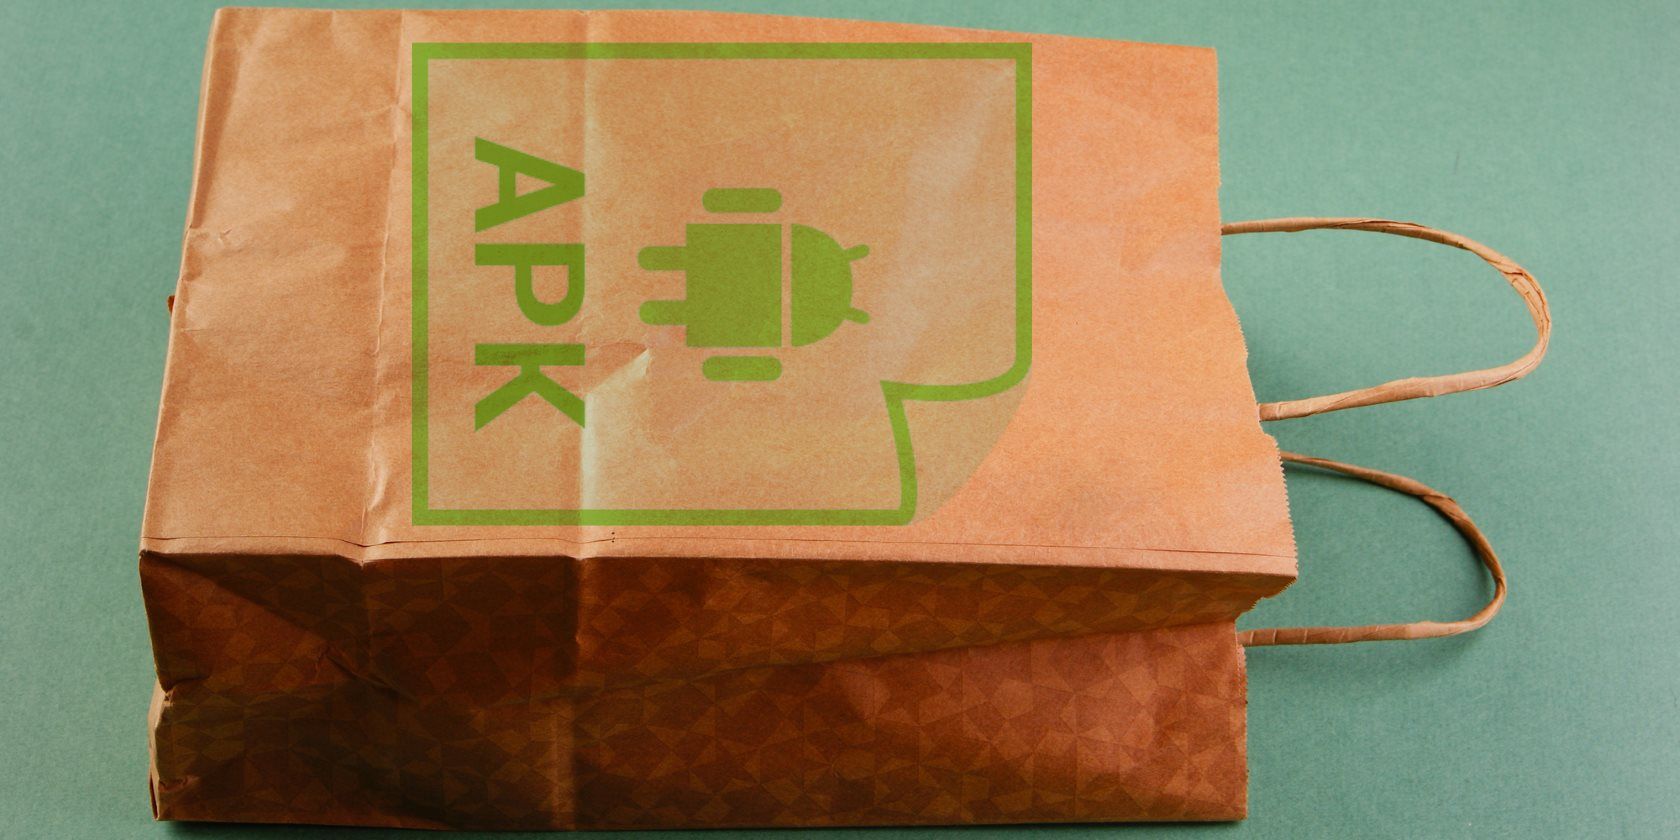 Understanding. APK file on Android - Gizmochina